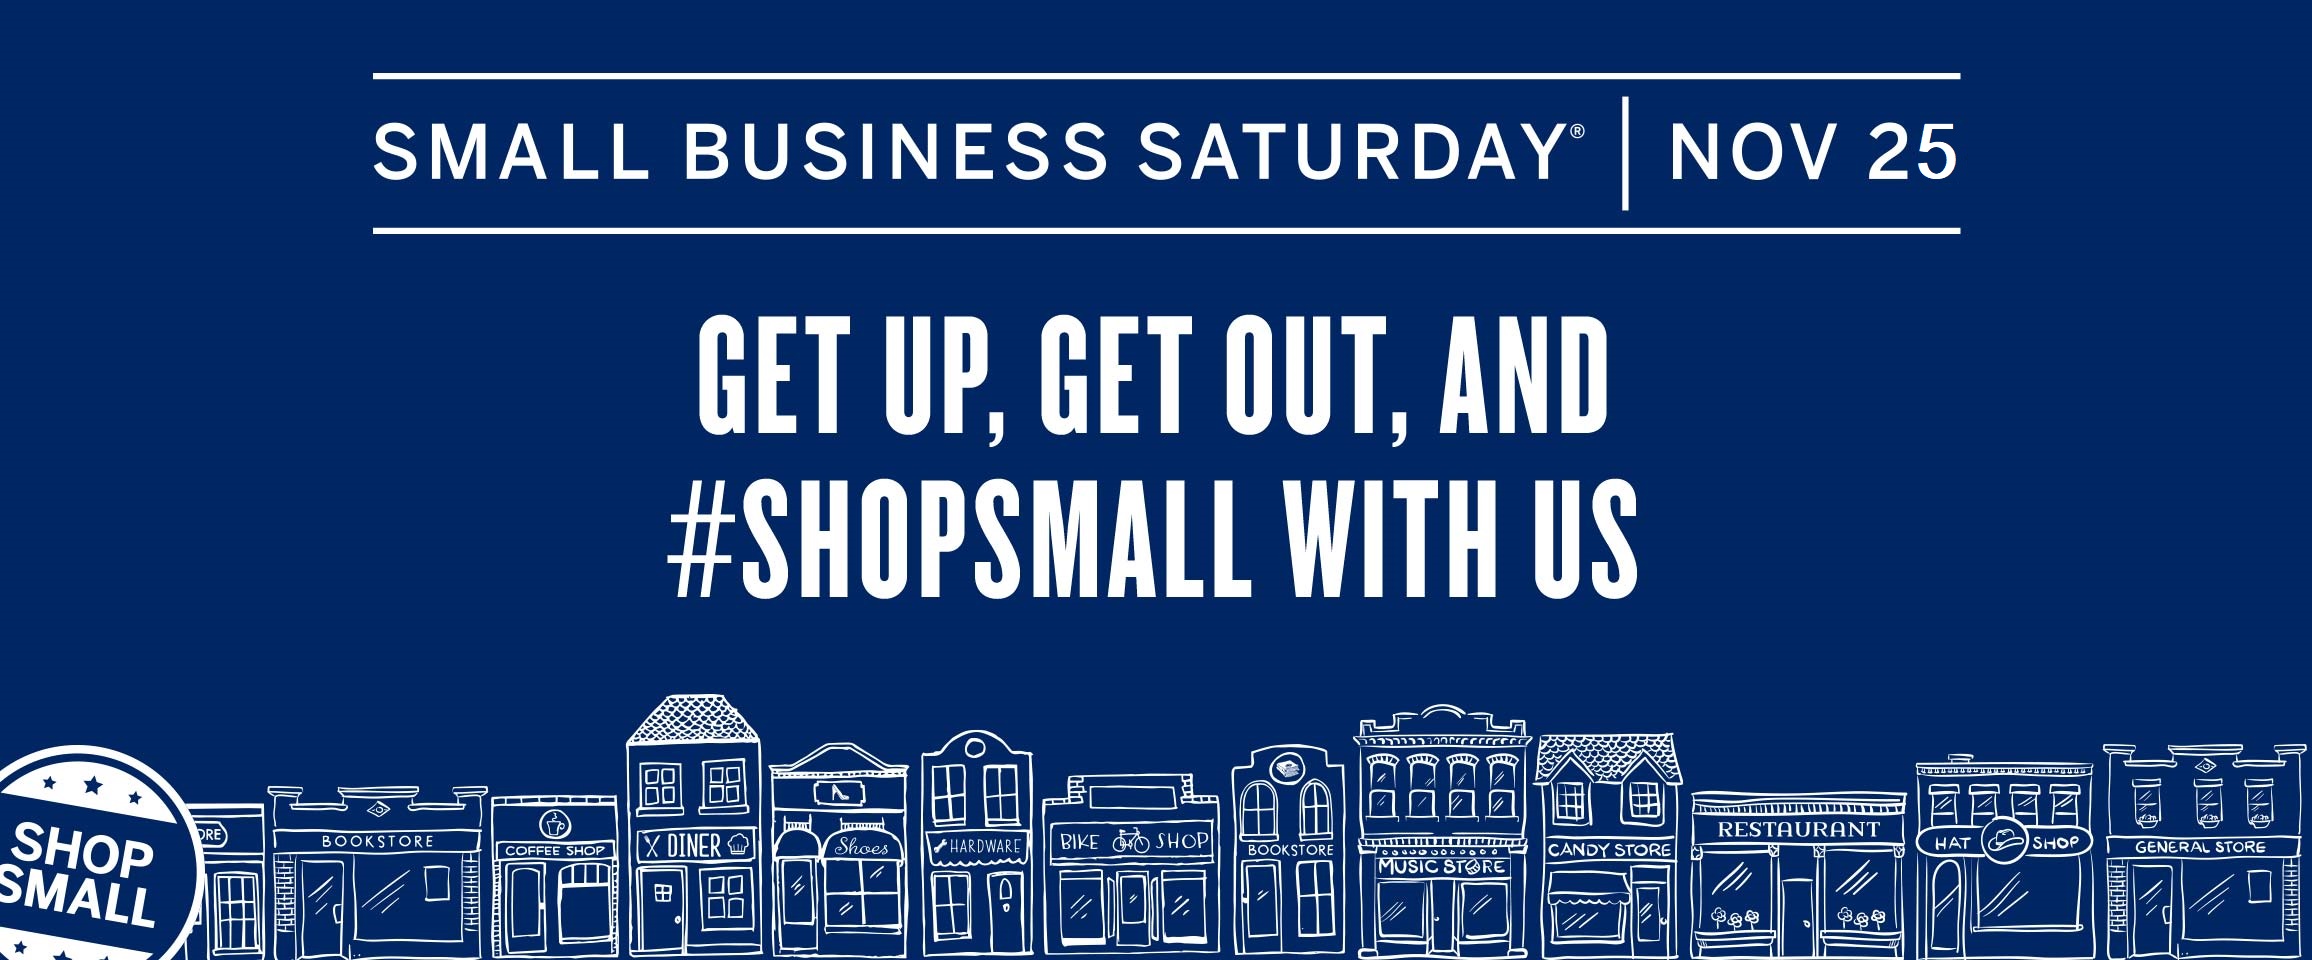 Small Business Saturday at State Street Jewelers